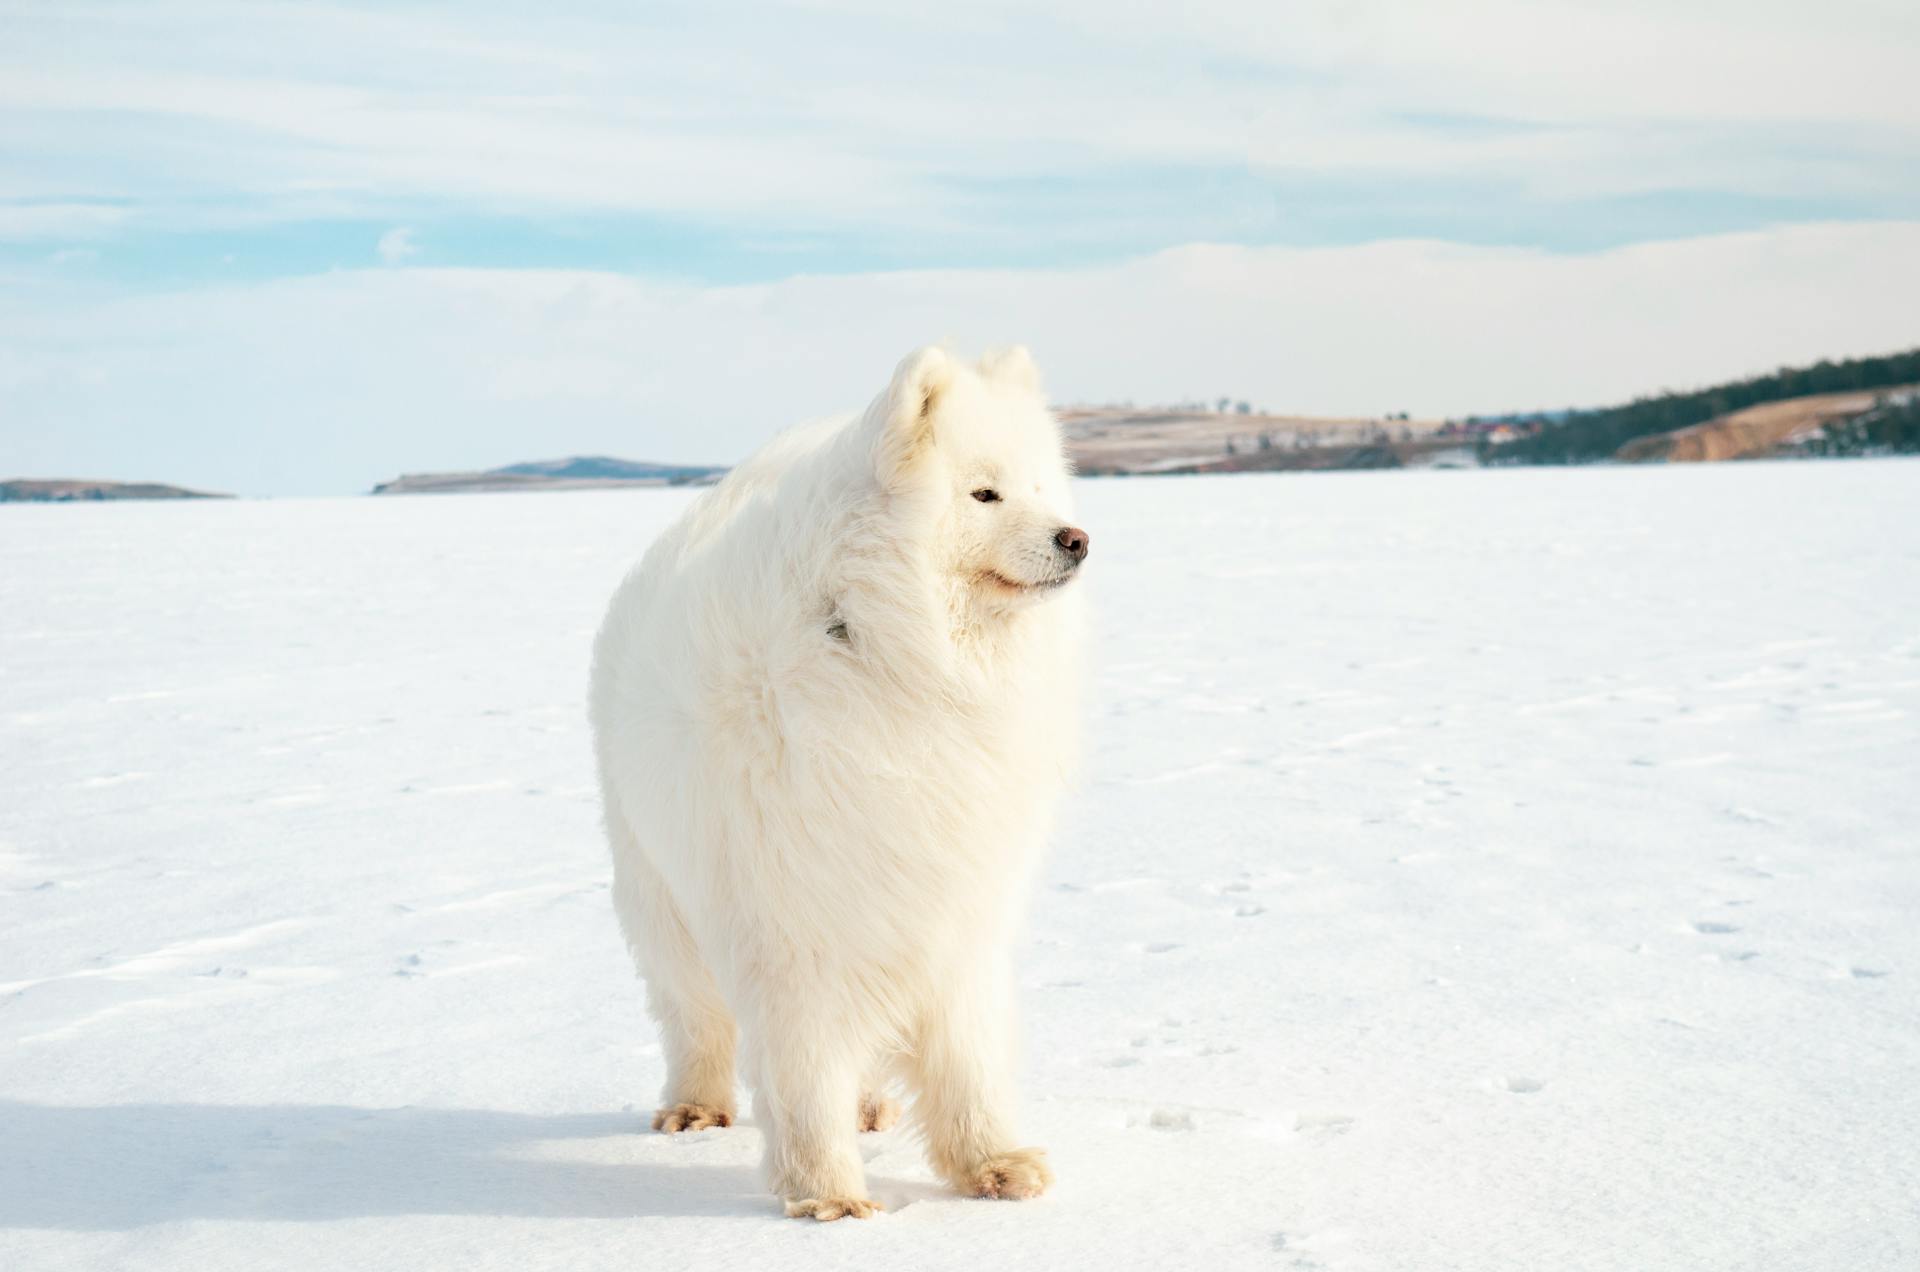 A Samoyed standing in a snowy field